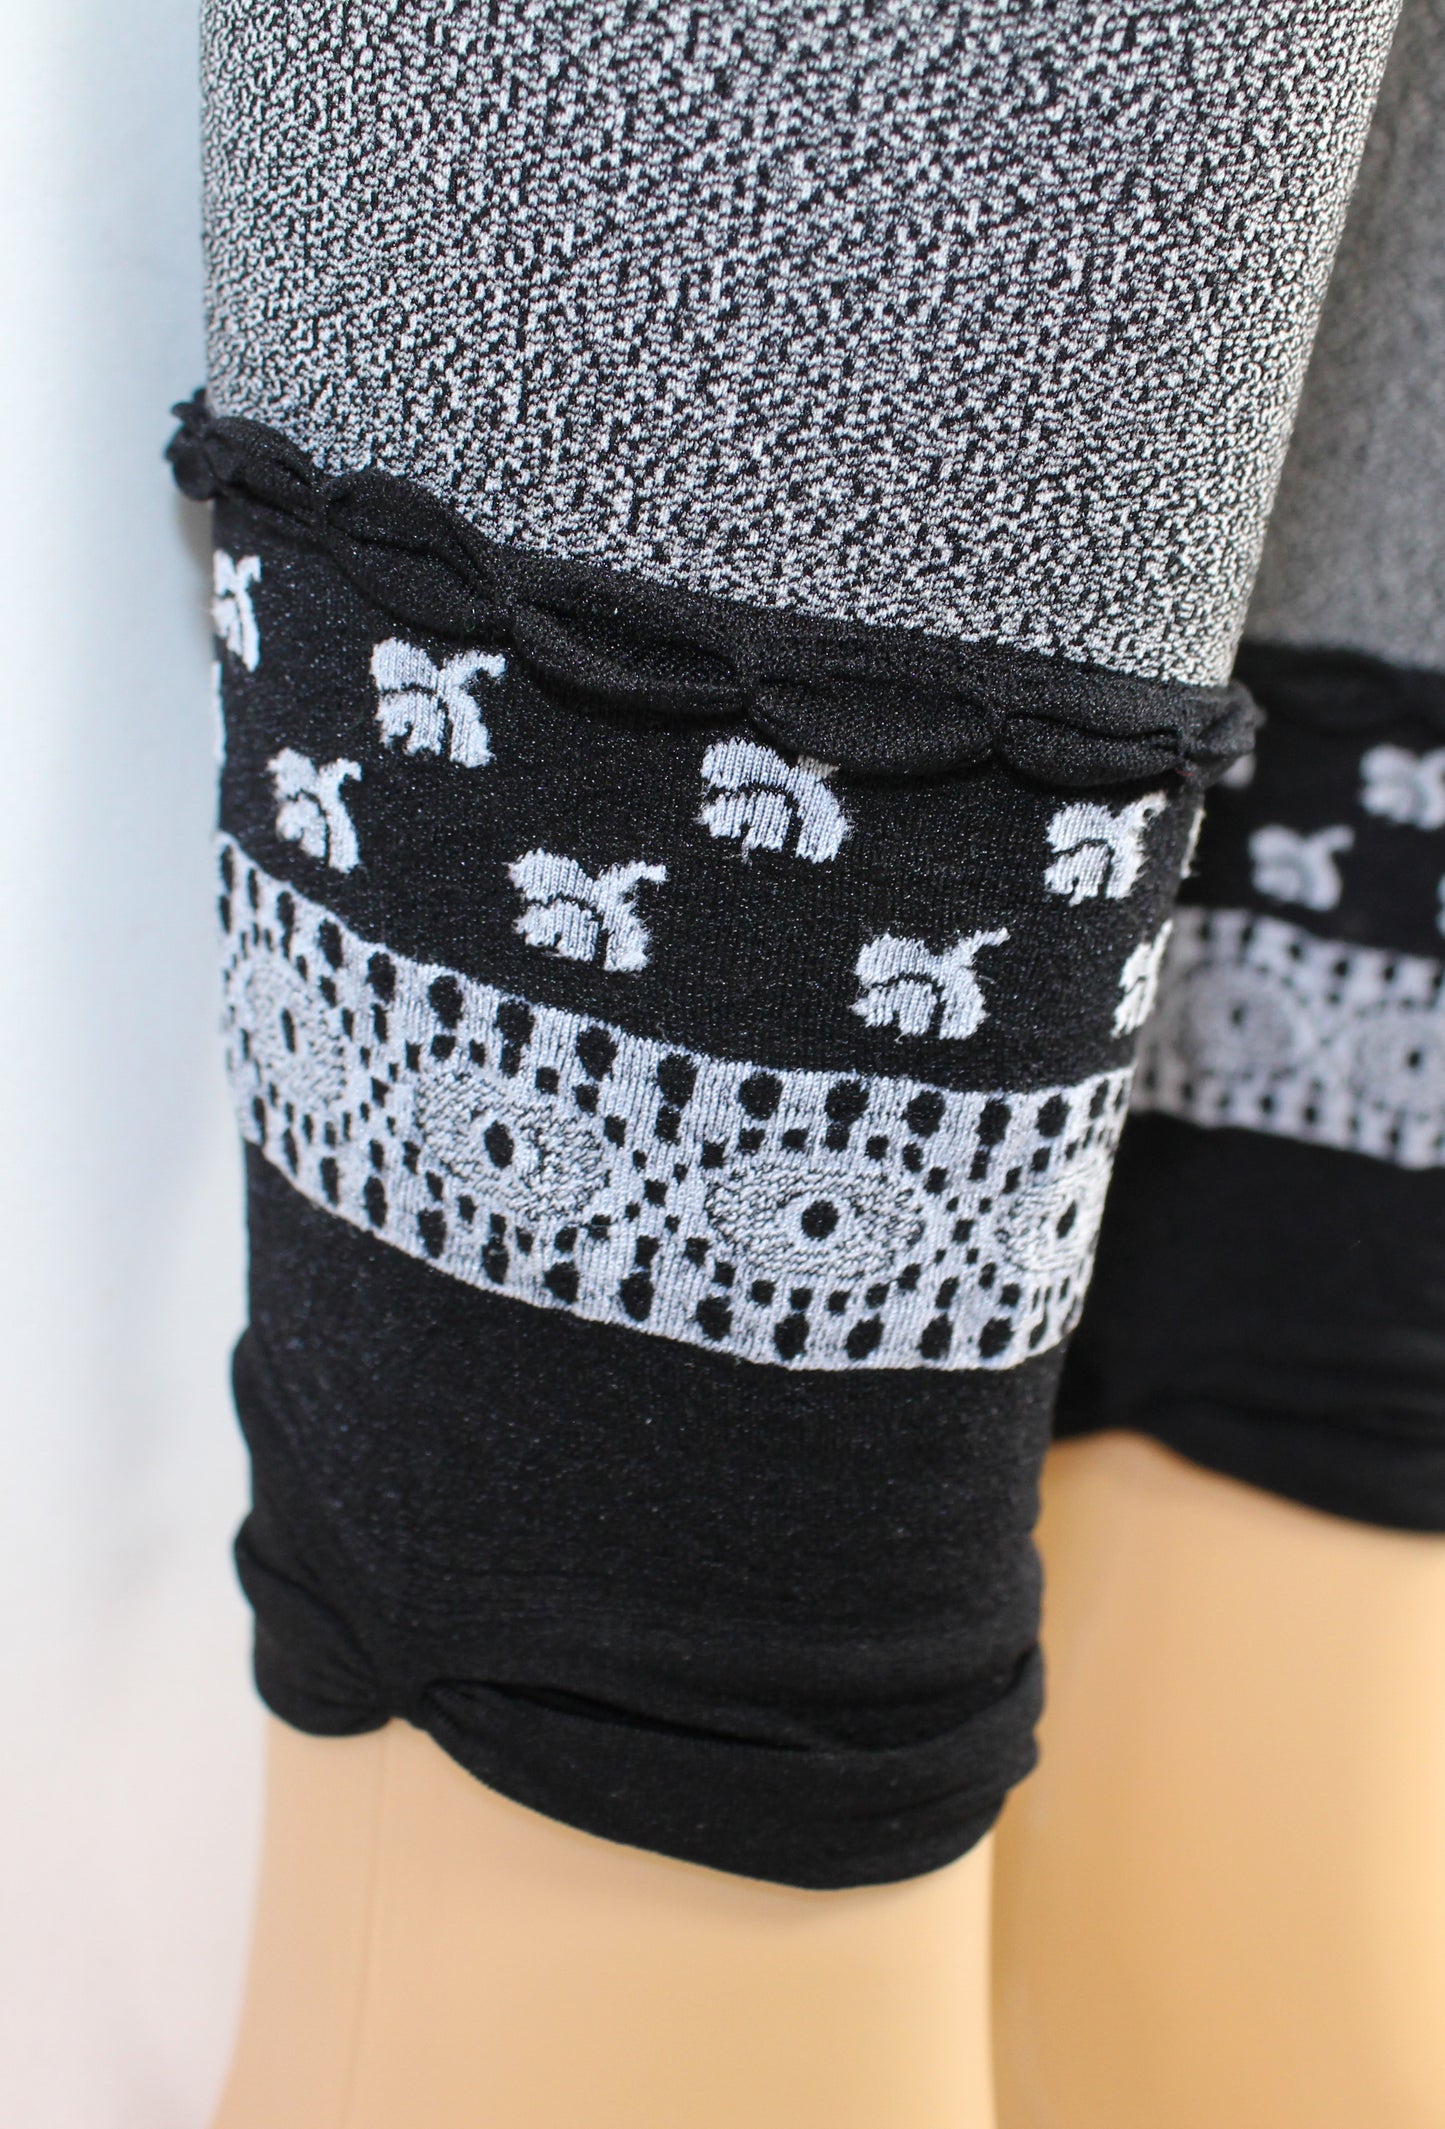 Omsa Peppermint Pantacollant - Soft ultra opaque kid's footless tights with an all over grey, white and black fleck effect and deep embroidered cuff with a woven floral lace and flower pattern and ruched cuff.